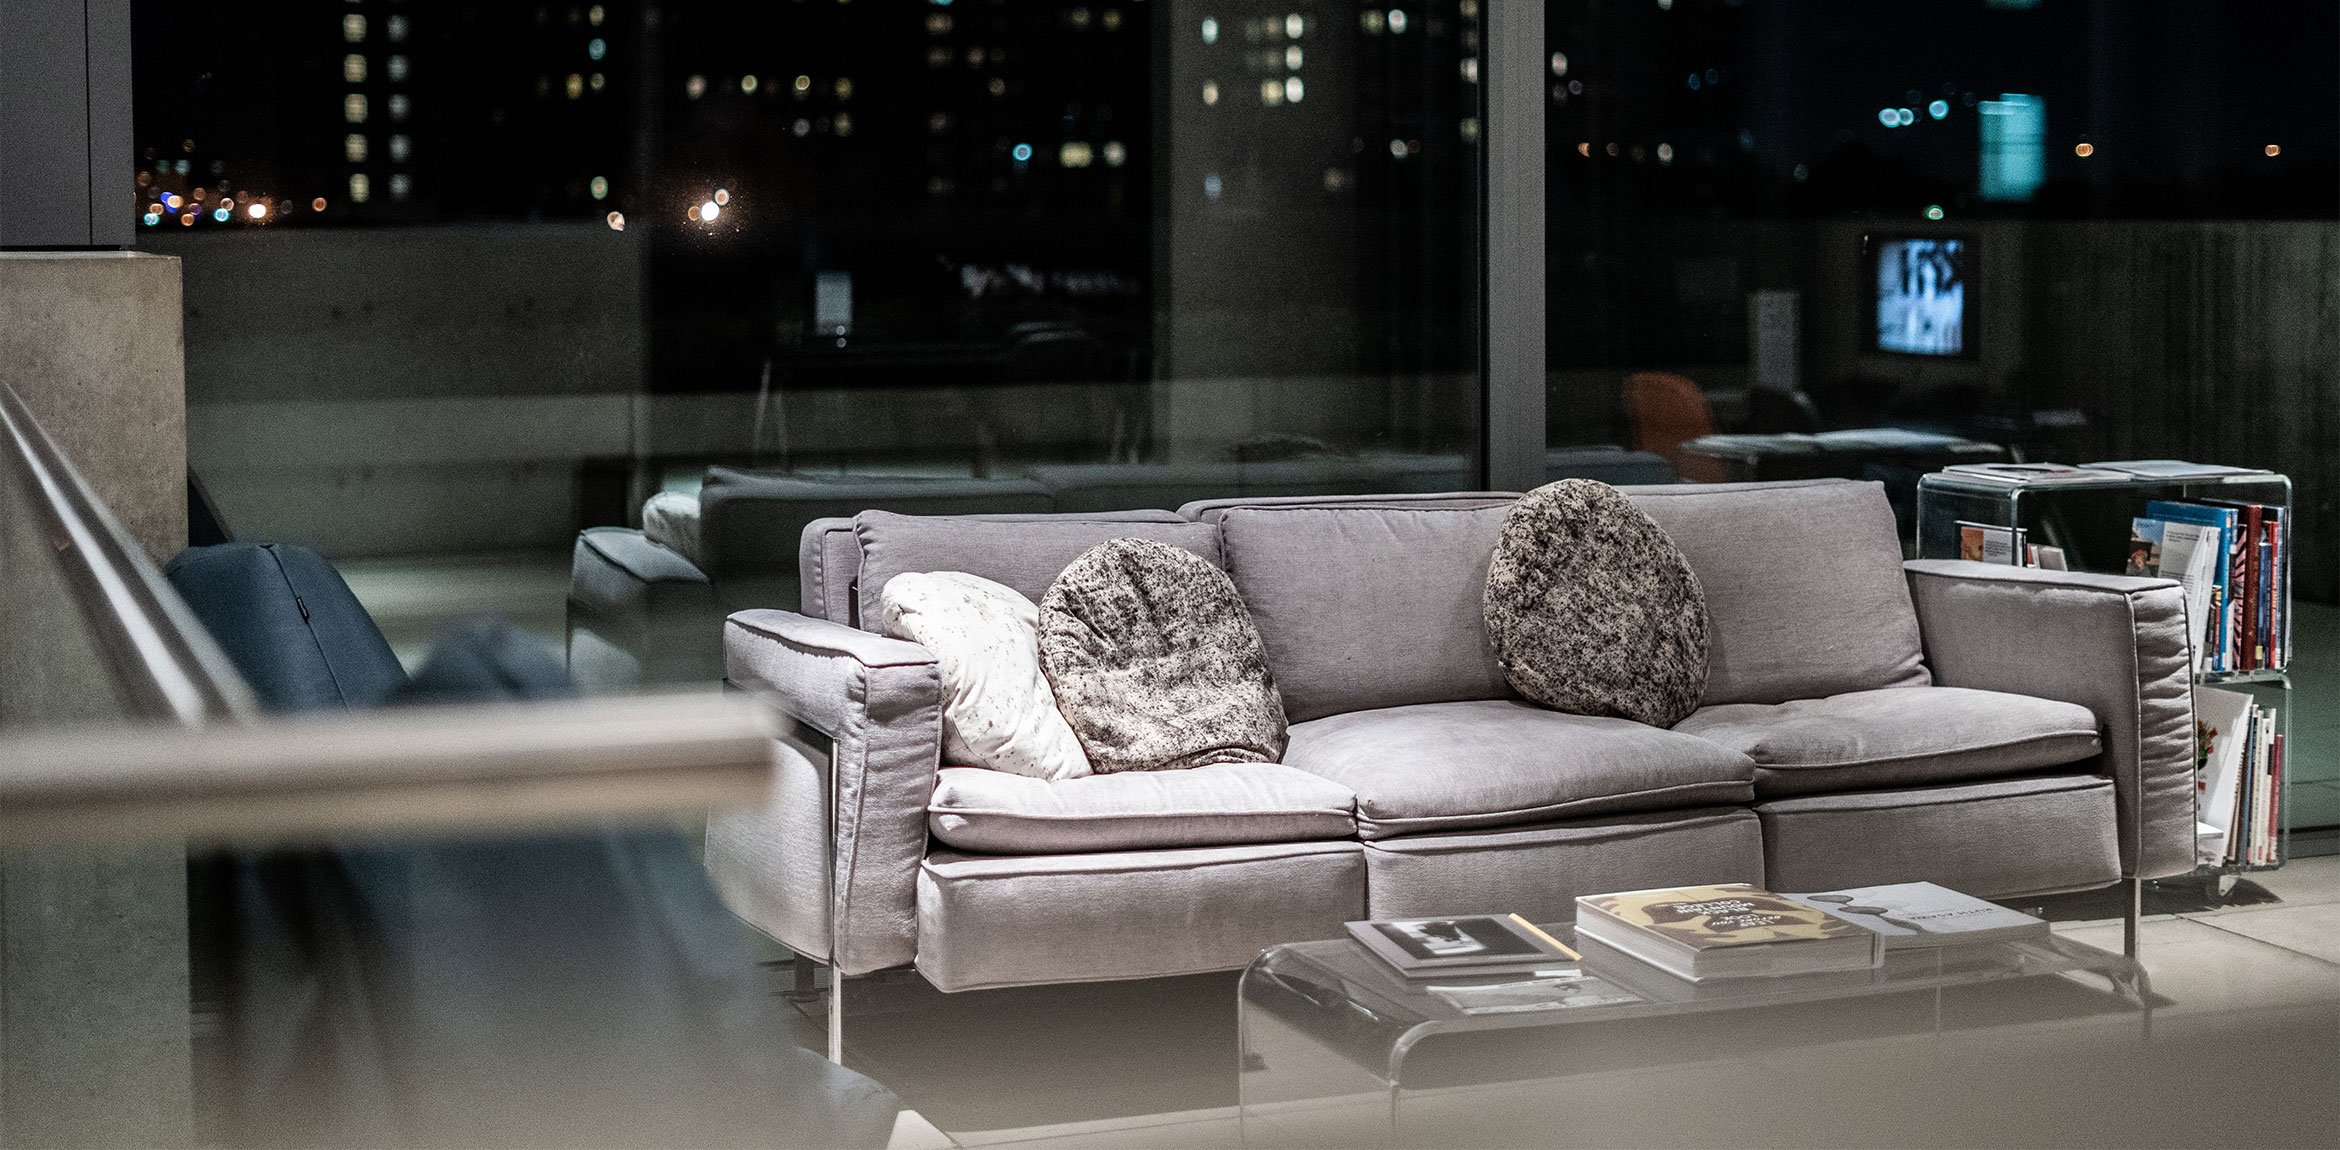 A couch in the Mezzanine at night.